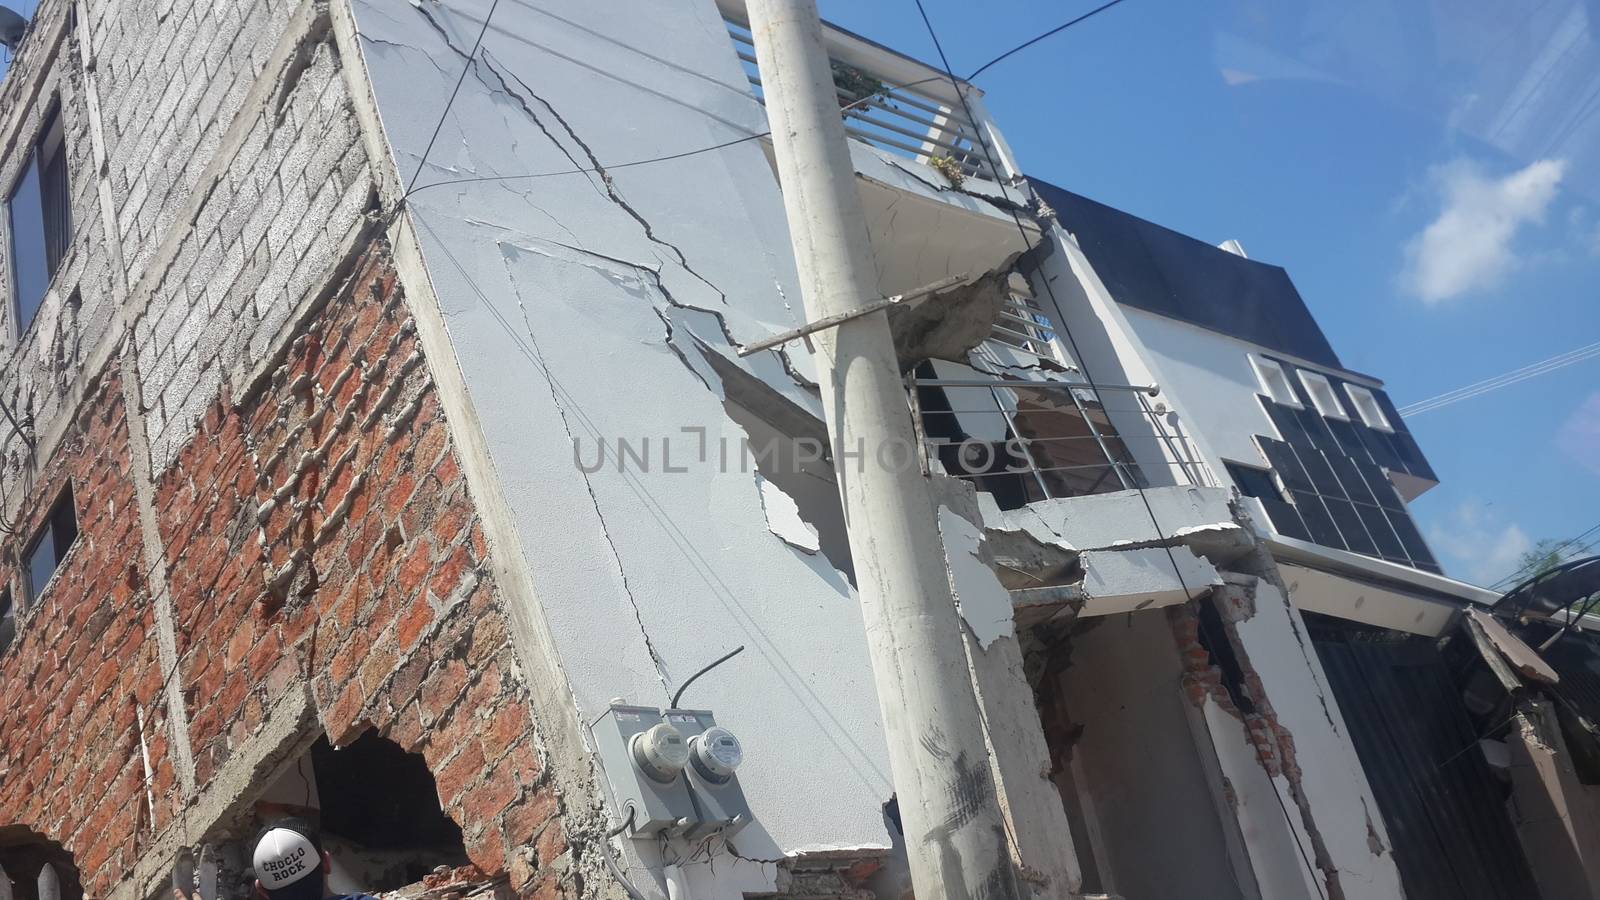 ECUADOR, Portoviejo: A building in Portoviejo, Ecuador shows heavy damage on April 17, 2016 the day after a devastating earthquake killed roughly 350 people, and counting. In Portoviejo, a prison was reportedly destroyed, allowing 100 inmates to escape. A state of emergency has been declared, and more than 13,000 soldiers and police officers have been deployed to the worst-hit areas of the country.